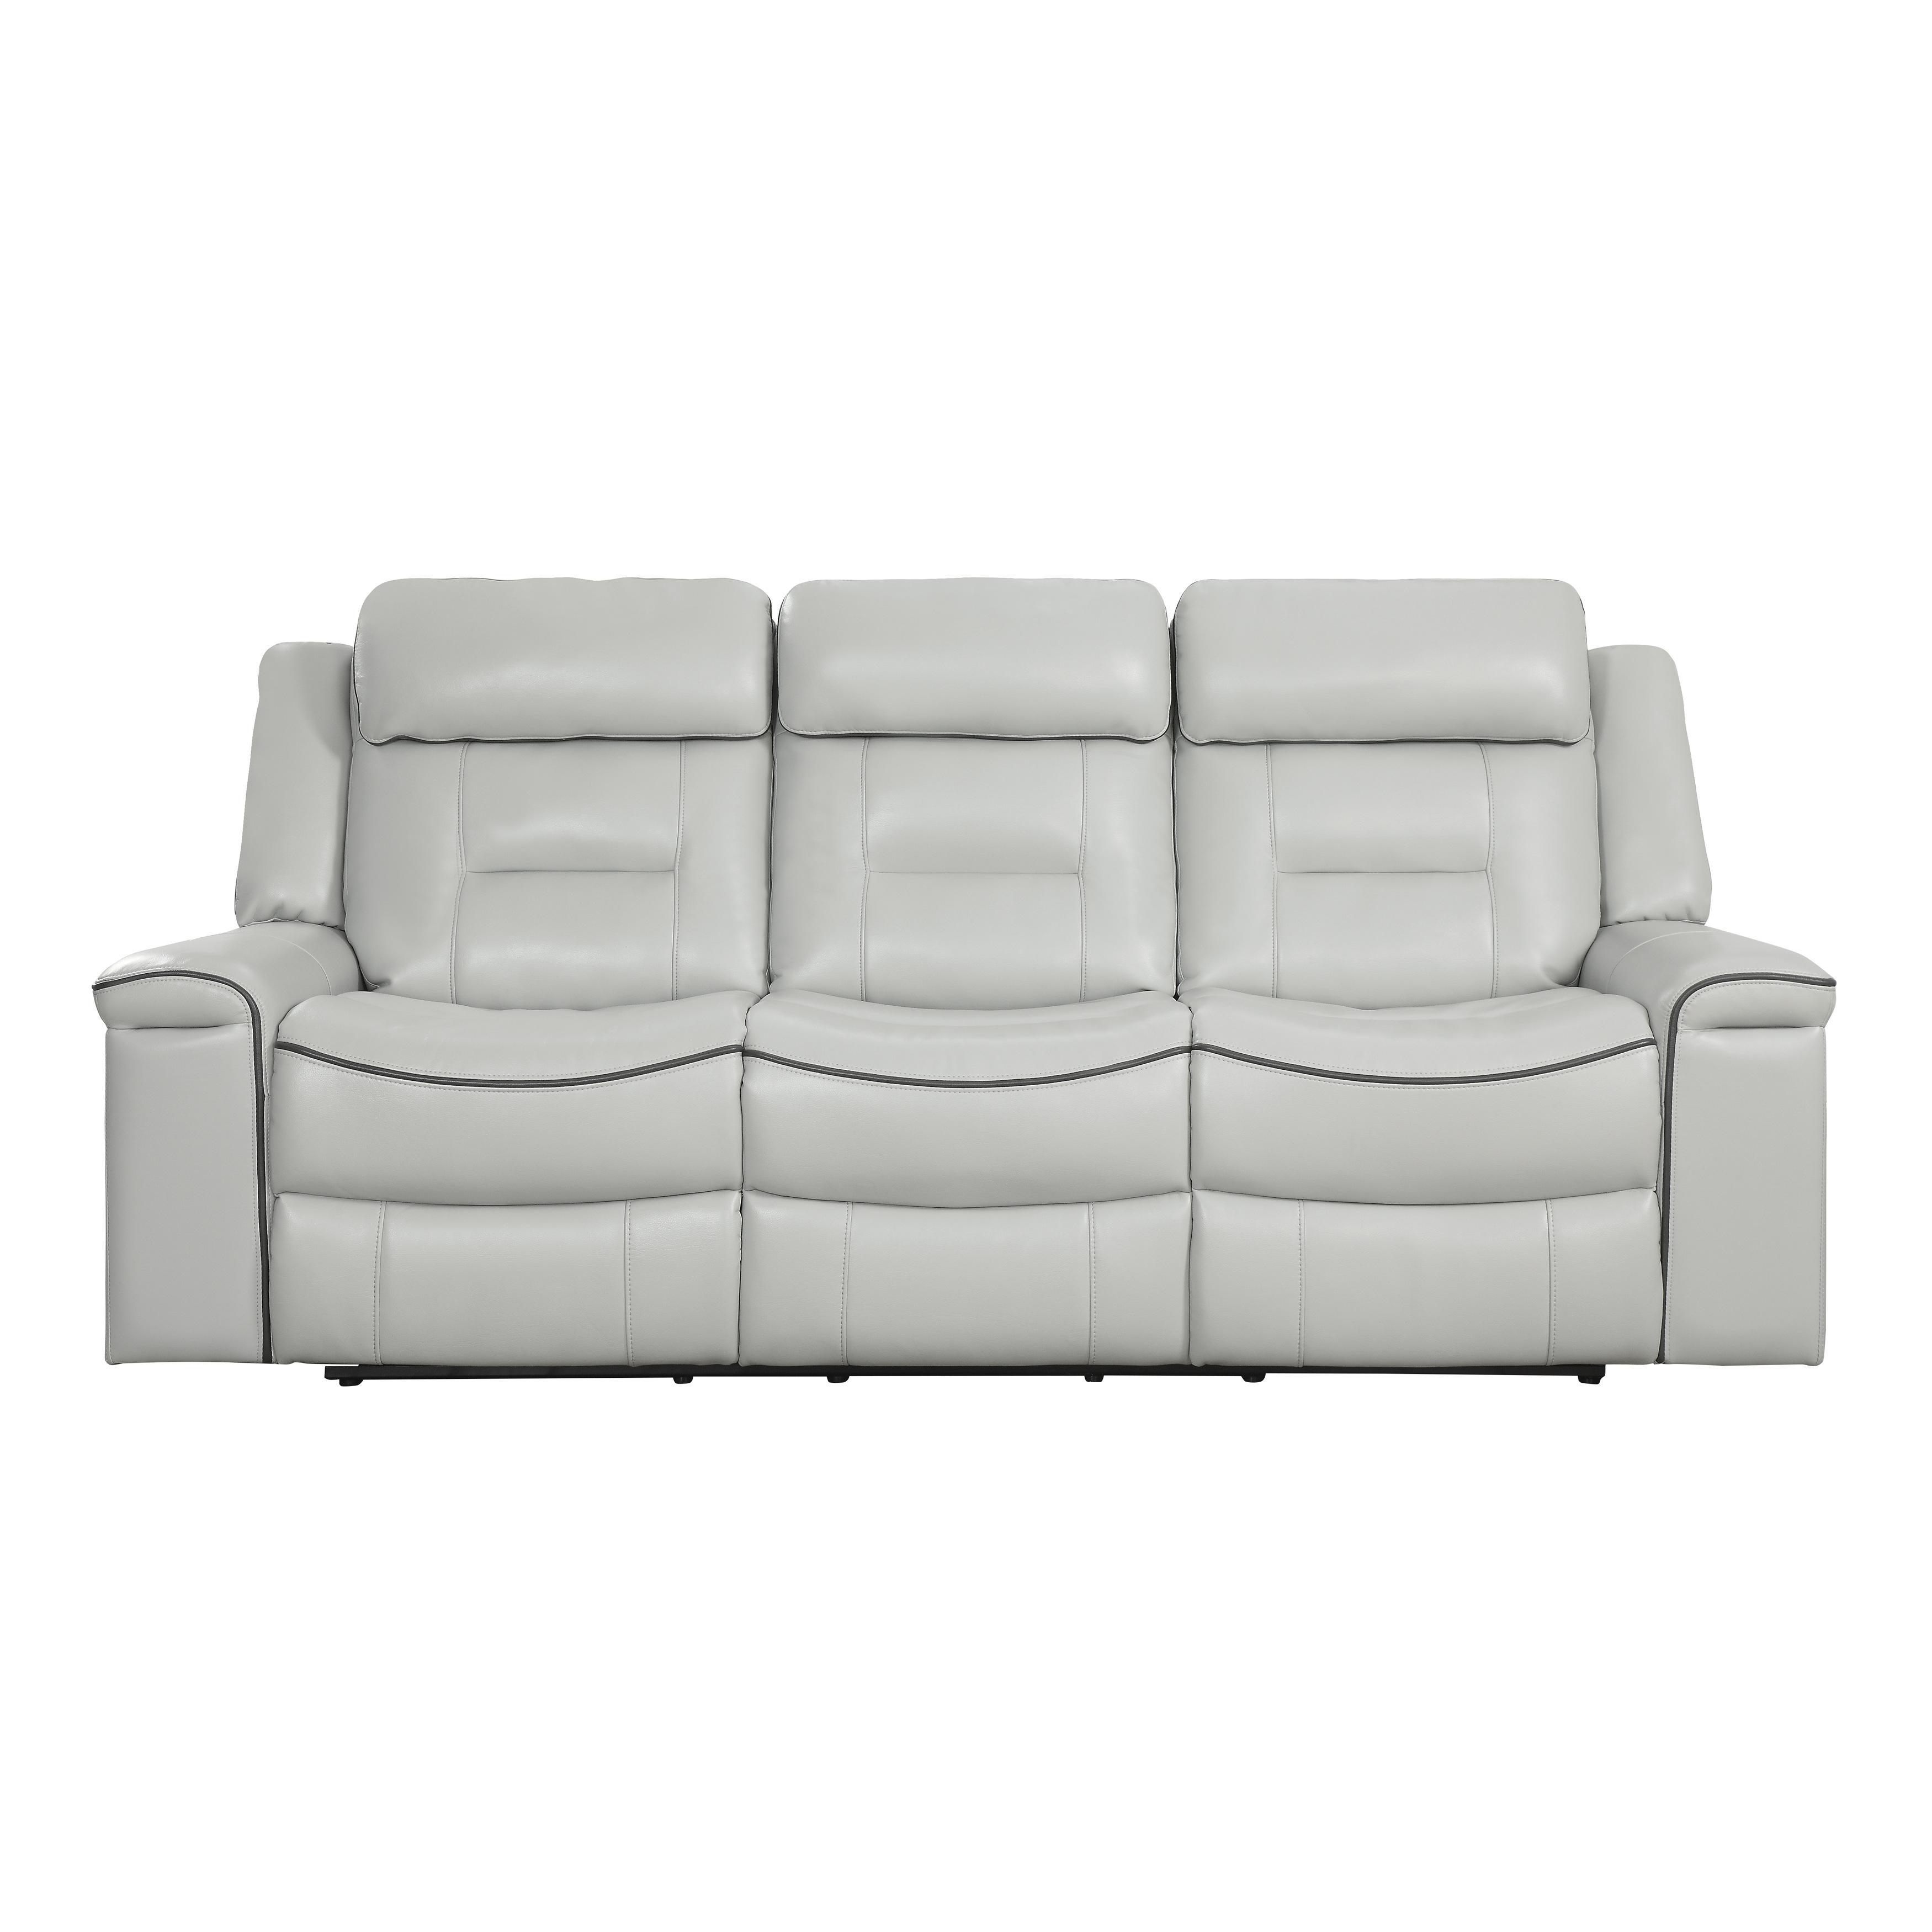 Contemporary Reclining Sofa 9999GY-3 Darwan 9999GY-3 in Light Gray Faux Leather